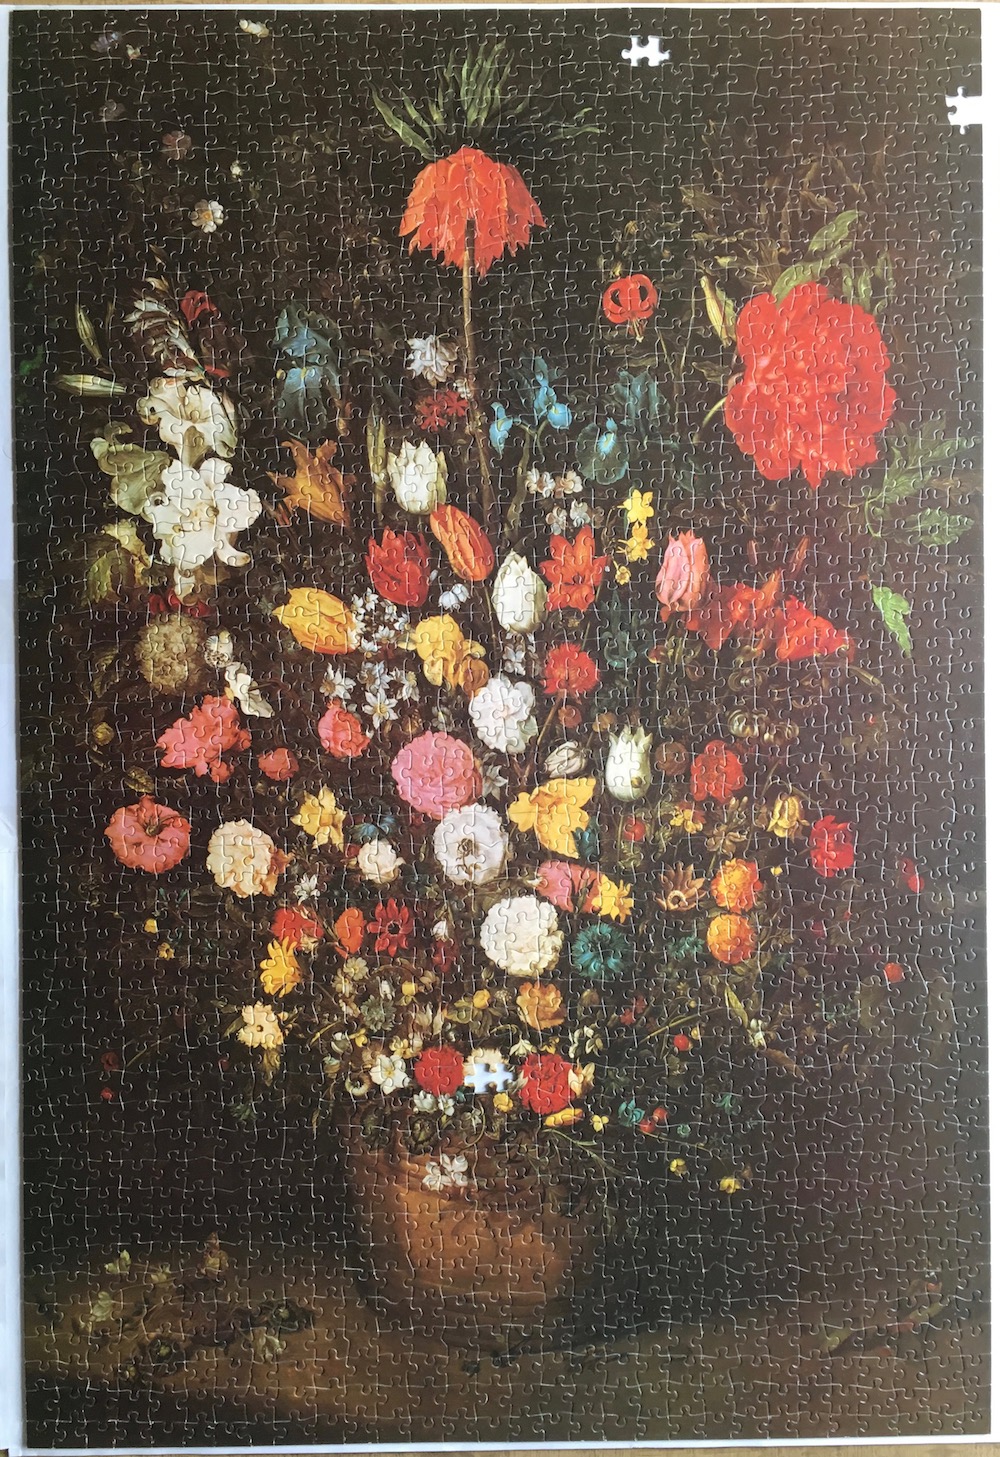 Image of the 1500, F.X. Schmid, Bouquet, Jan Brueghel the Elder, Picture of the Puzzle Assembled